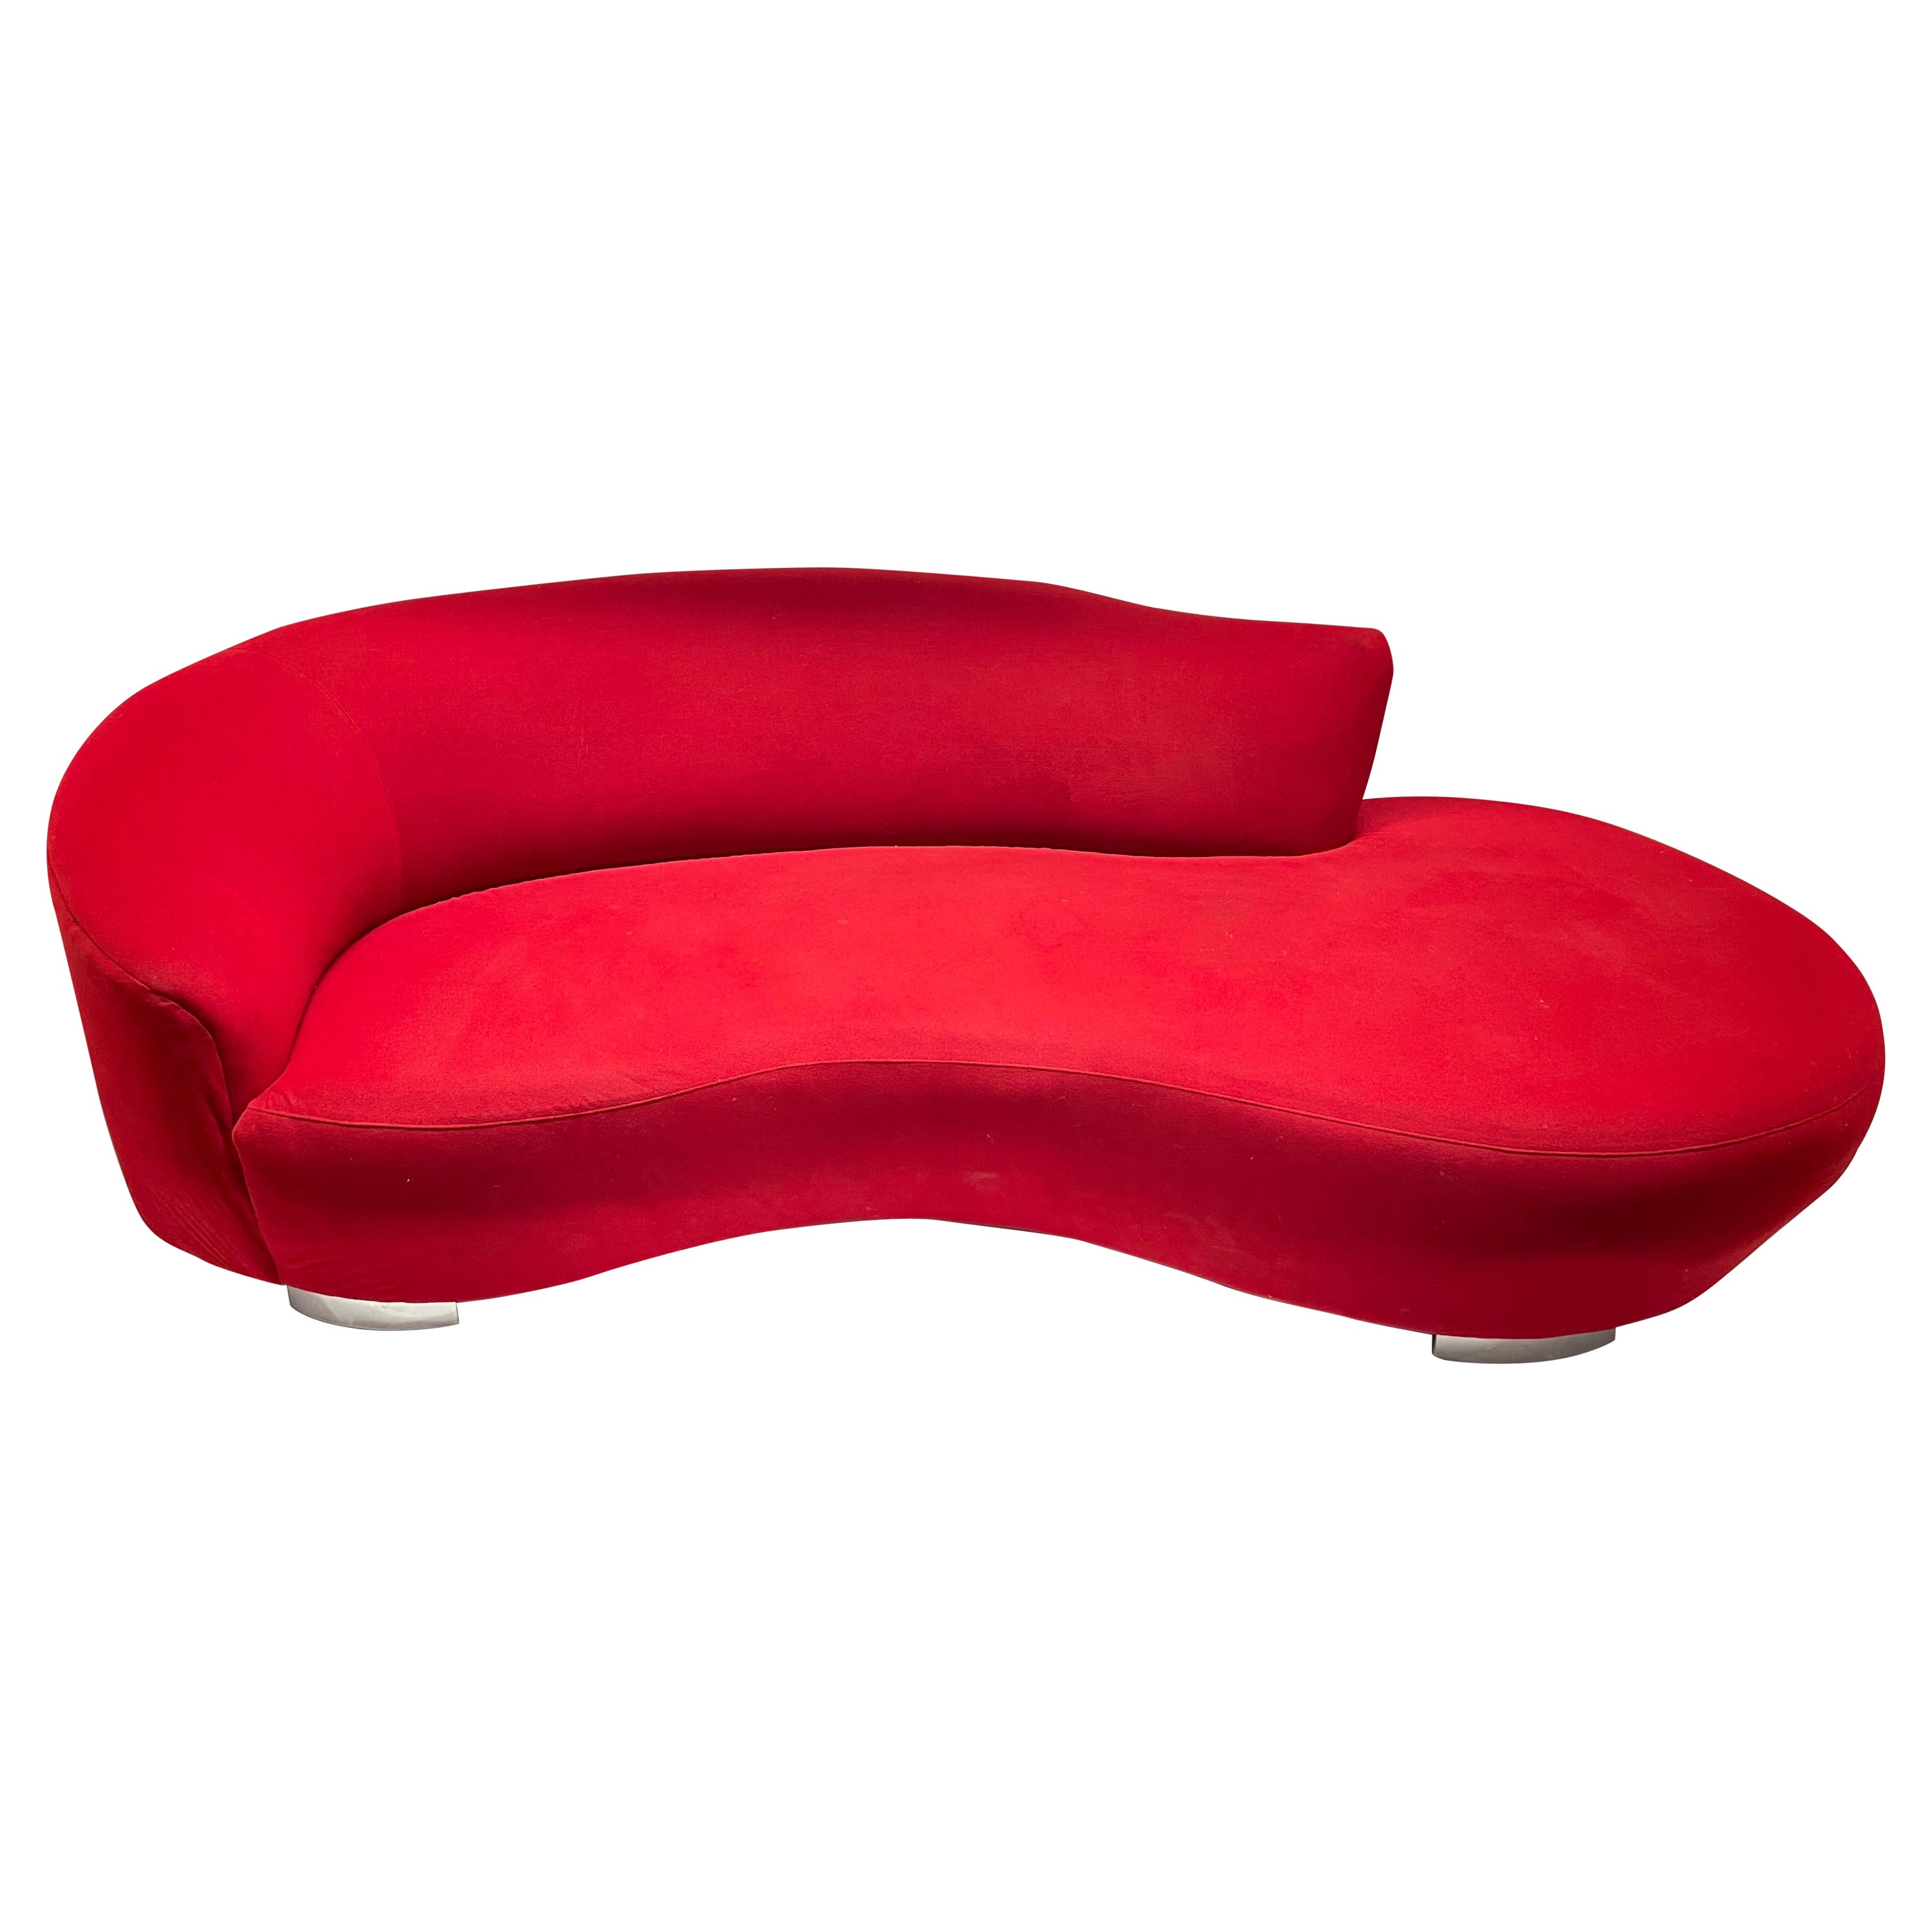 Post Modern Serpentine Kidney "Cloud" Chaise Lounge Sofa, Circa 1990s For Sale